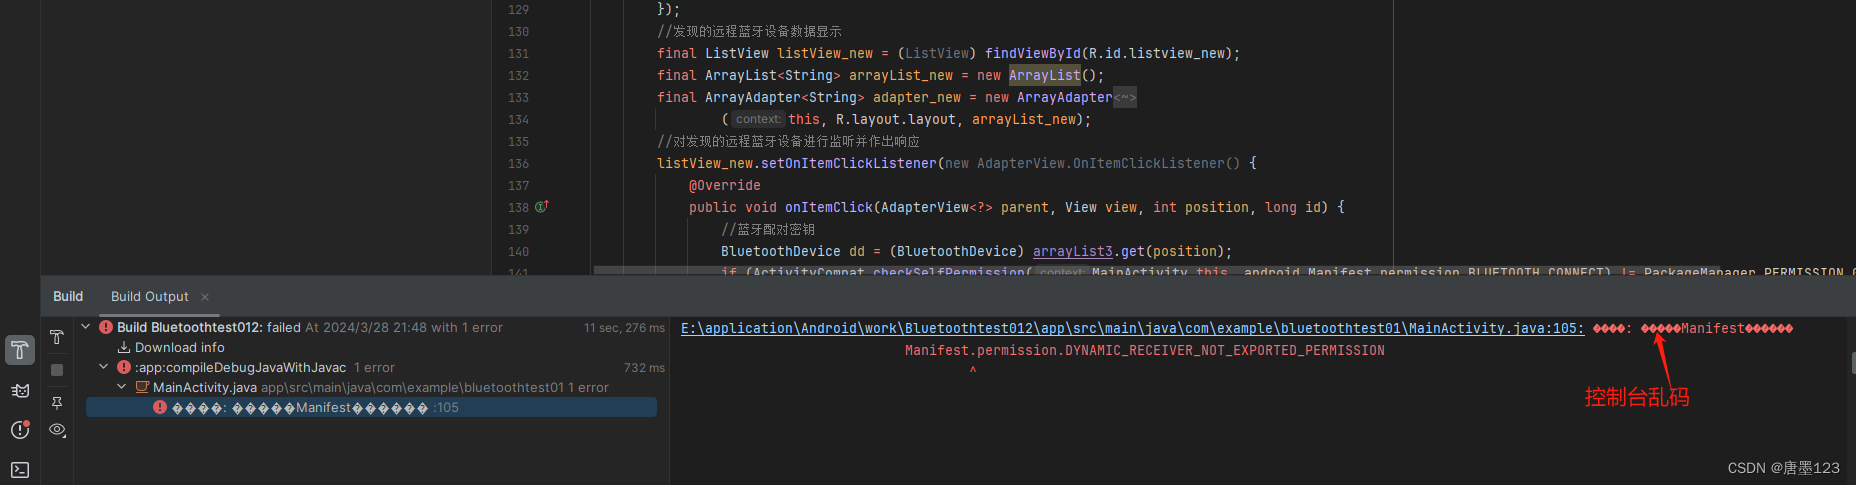 Android Studio<span style='color:red;'>控制台</span>输出<span style='color:red;'>中文</span><span style='color:red;'>乱</span><span style='color:red;'>码</span>问题